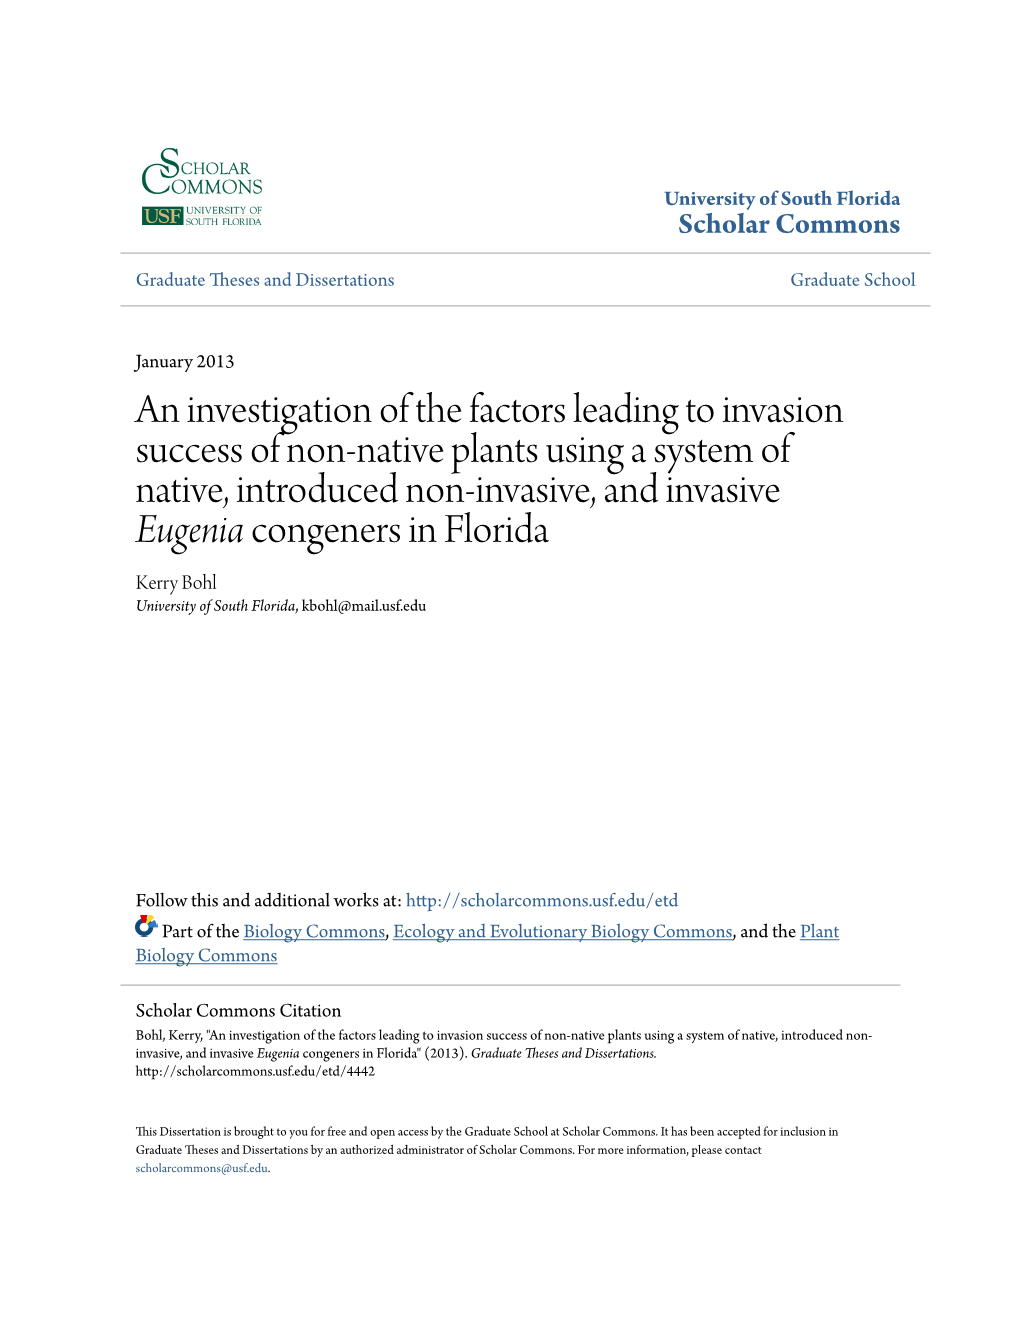 An Investigation of the Factors Leading to Invasion Success of Non-Native